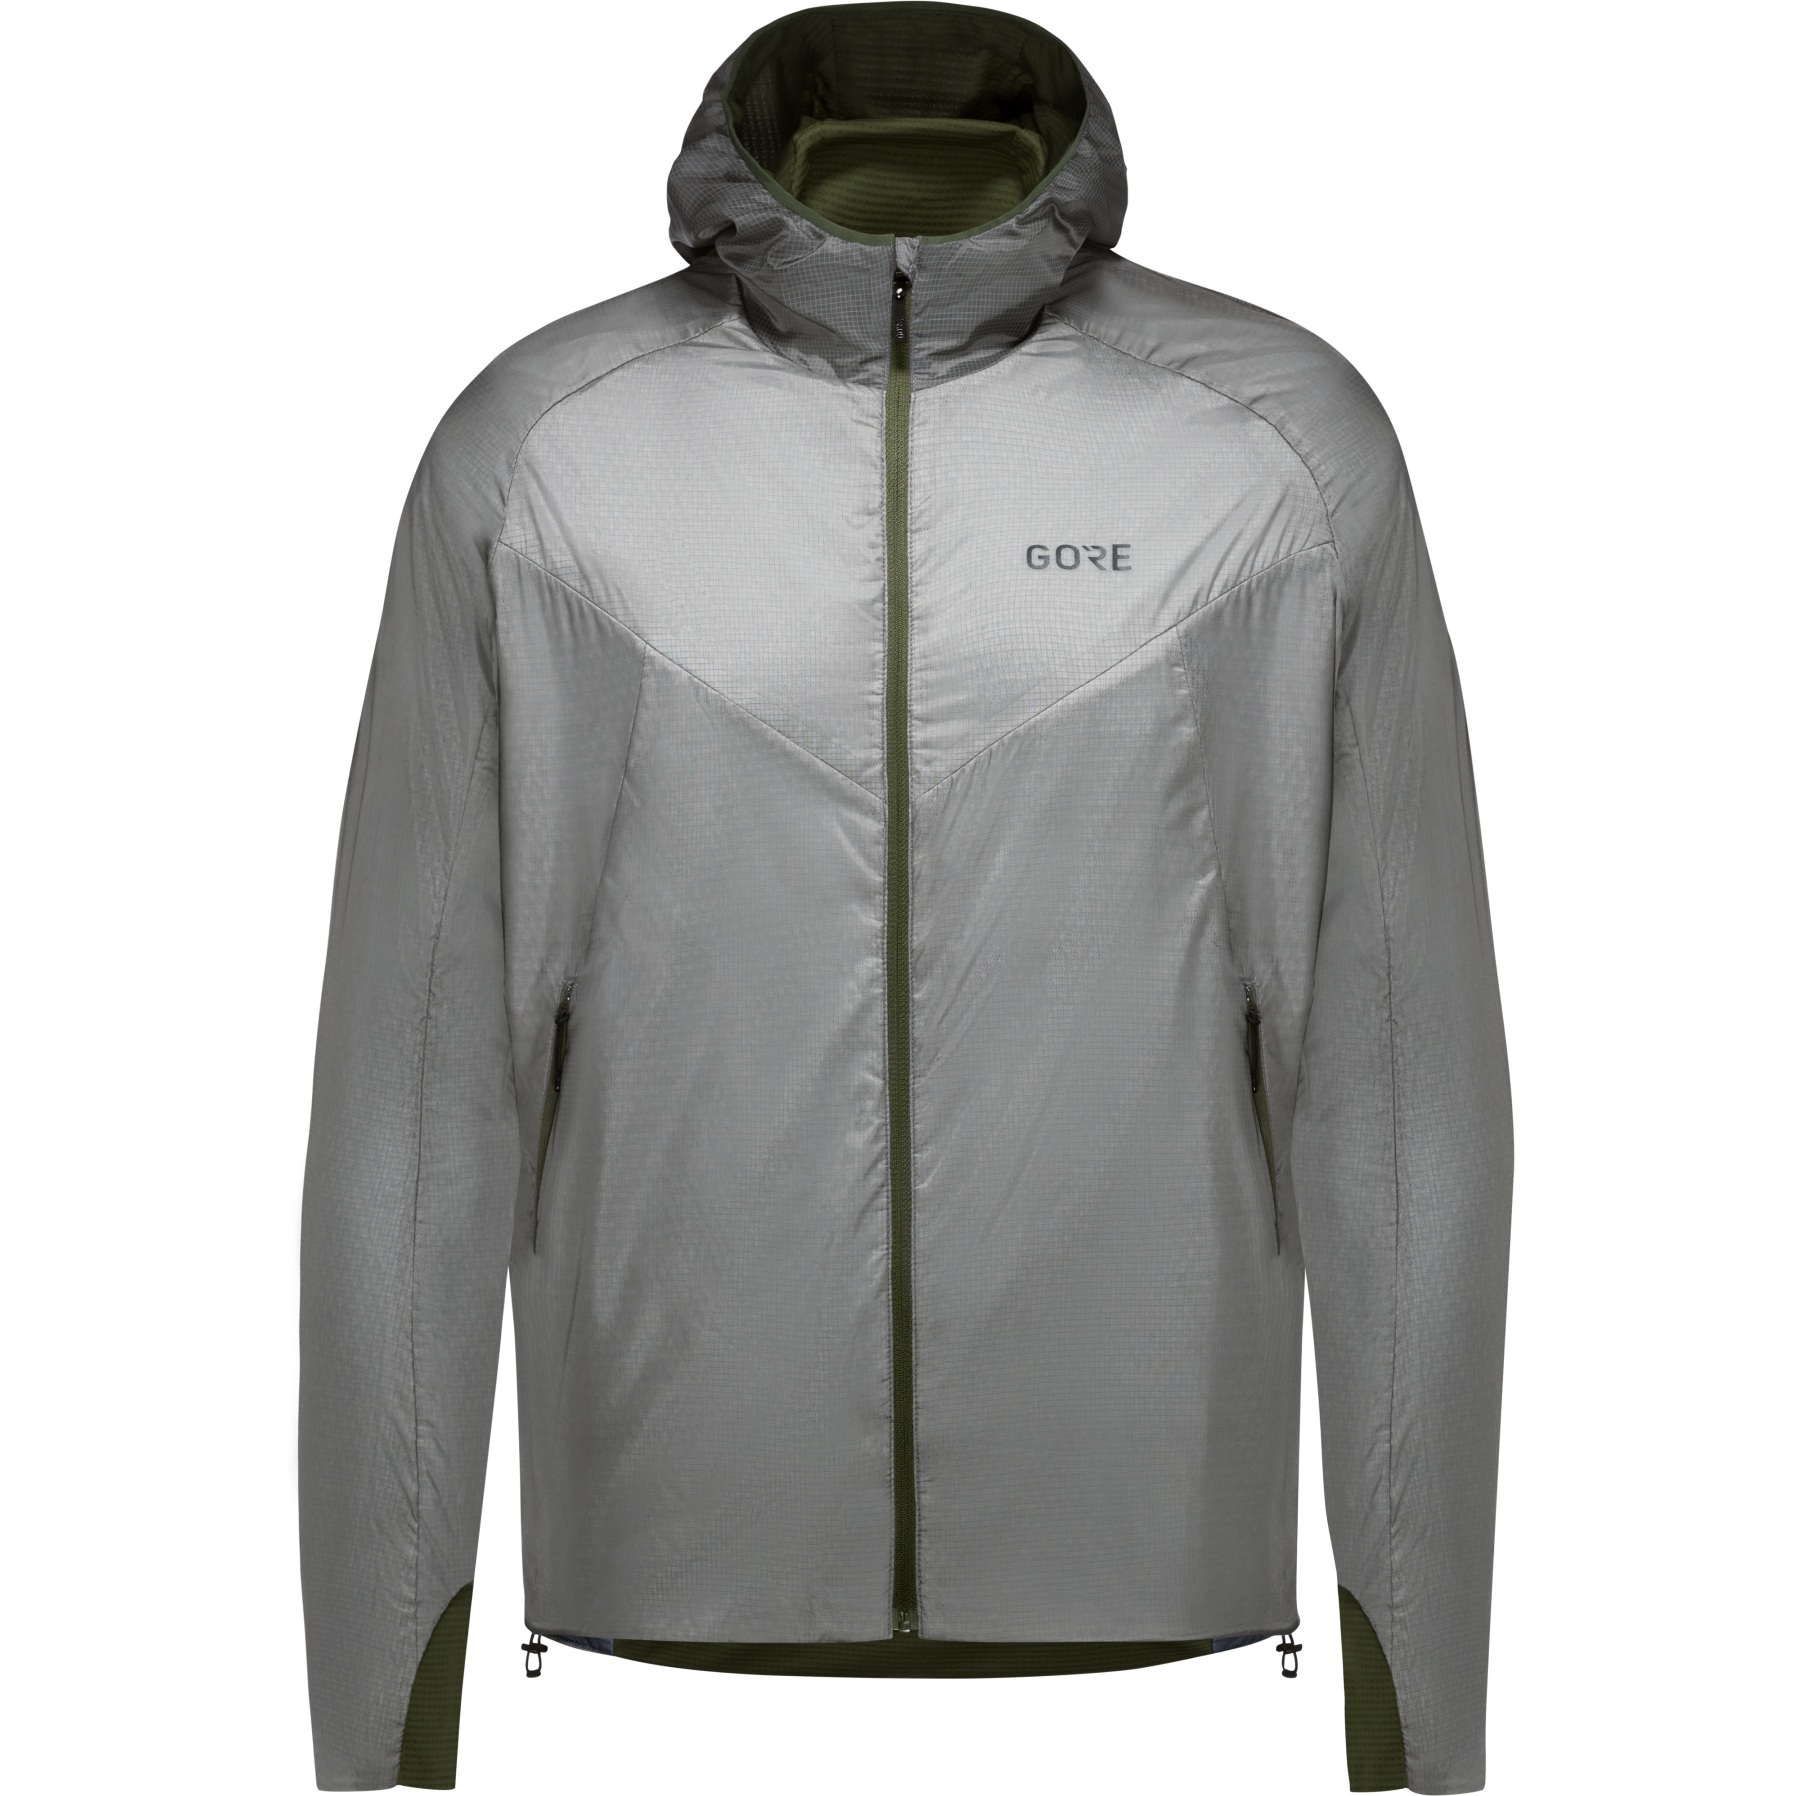 Picture of GOREWEAR R5 Gore-Tex Infinium Insulated Jacket - lab gray / utility green BFBH